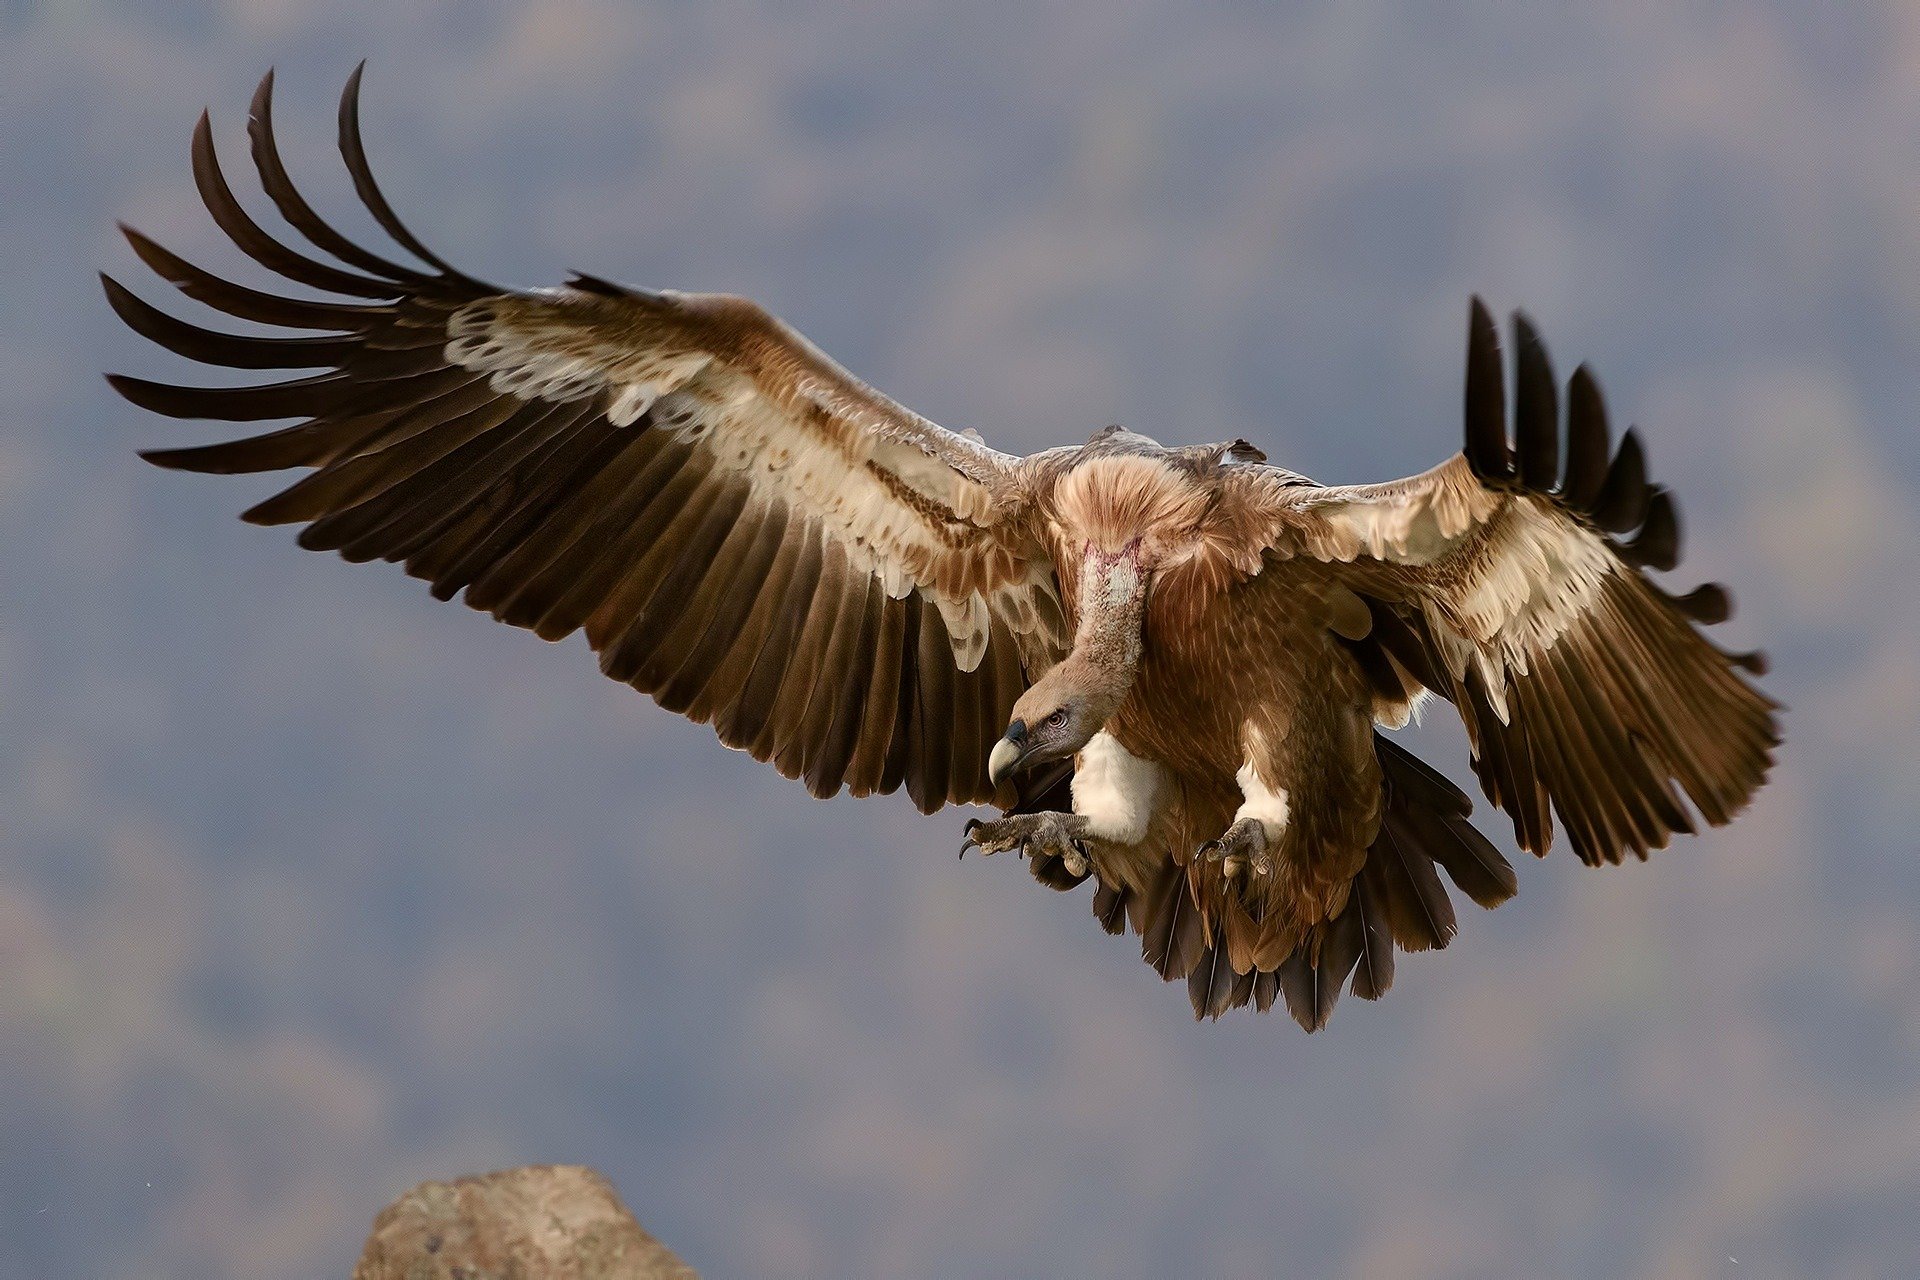 Research shows how vultures evesdrop to gather vital flight information